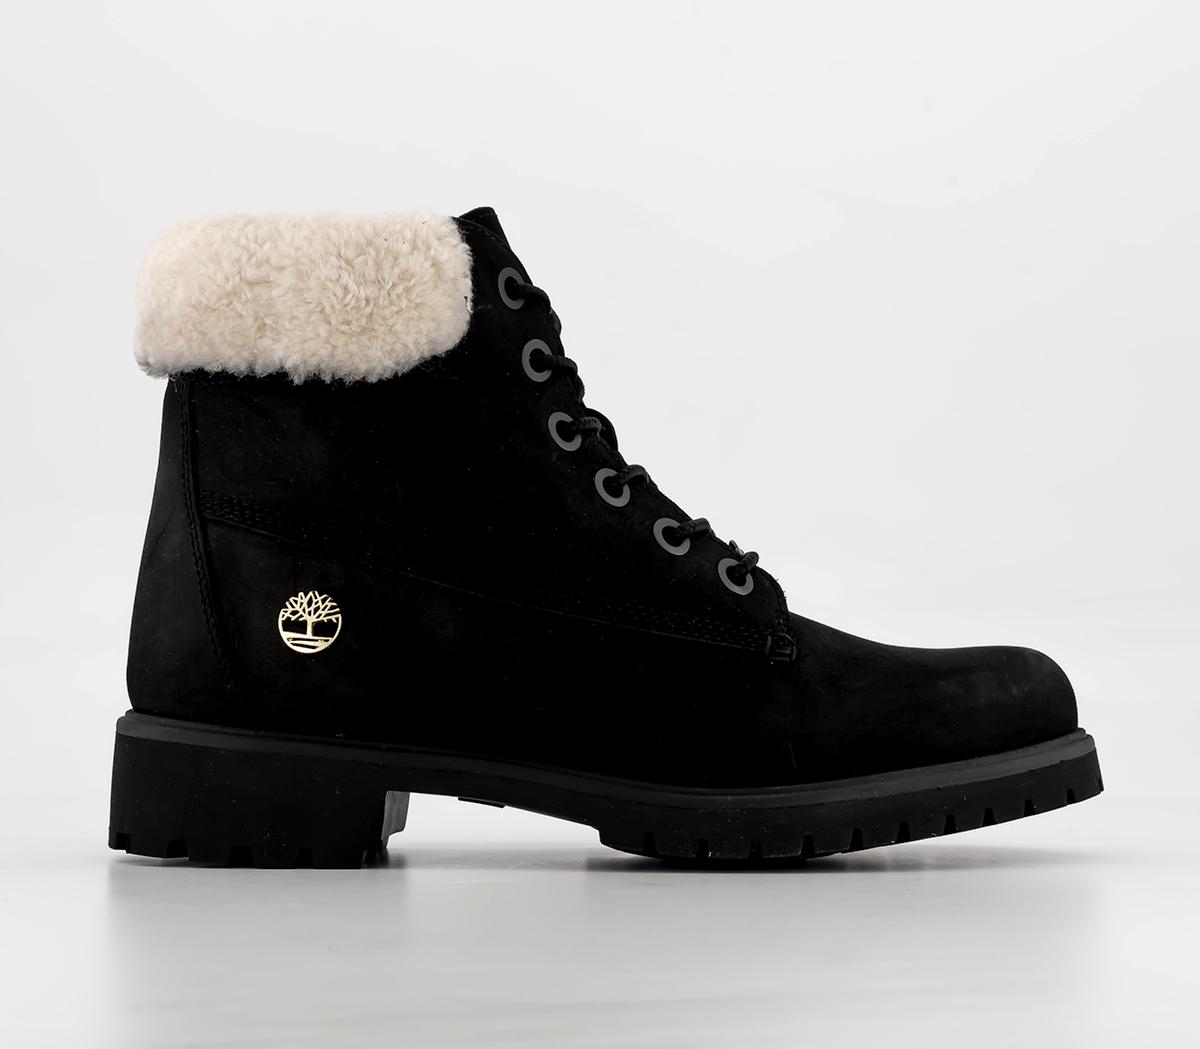 Lyonsdale 6 Inch Boots Black Shearling Cuff